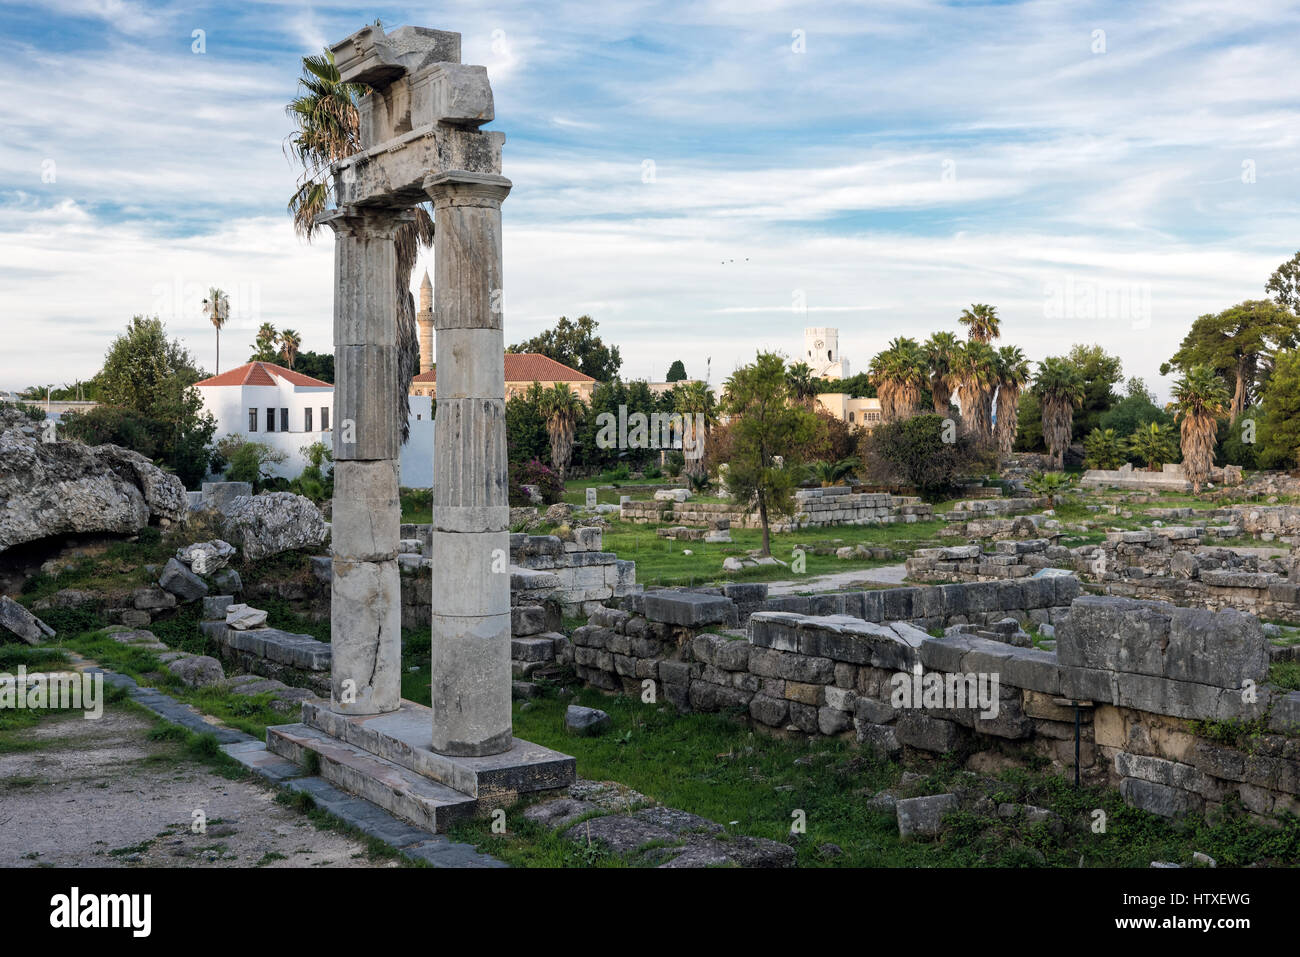 The archaeological site of Ancient Agora in Kos, Greece Stock Photo